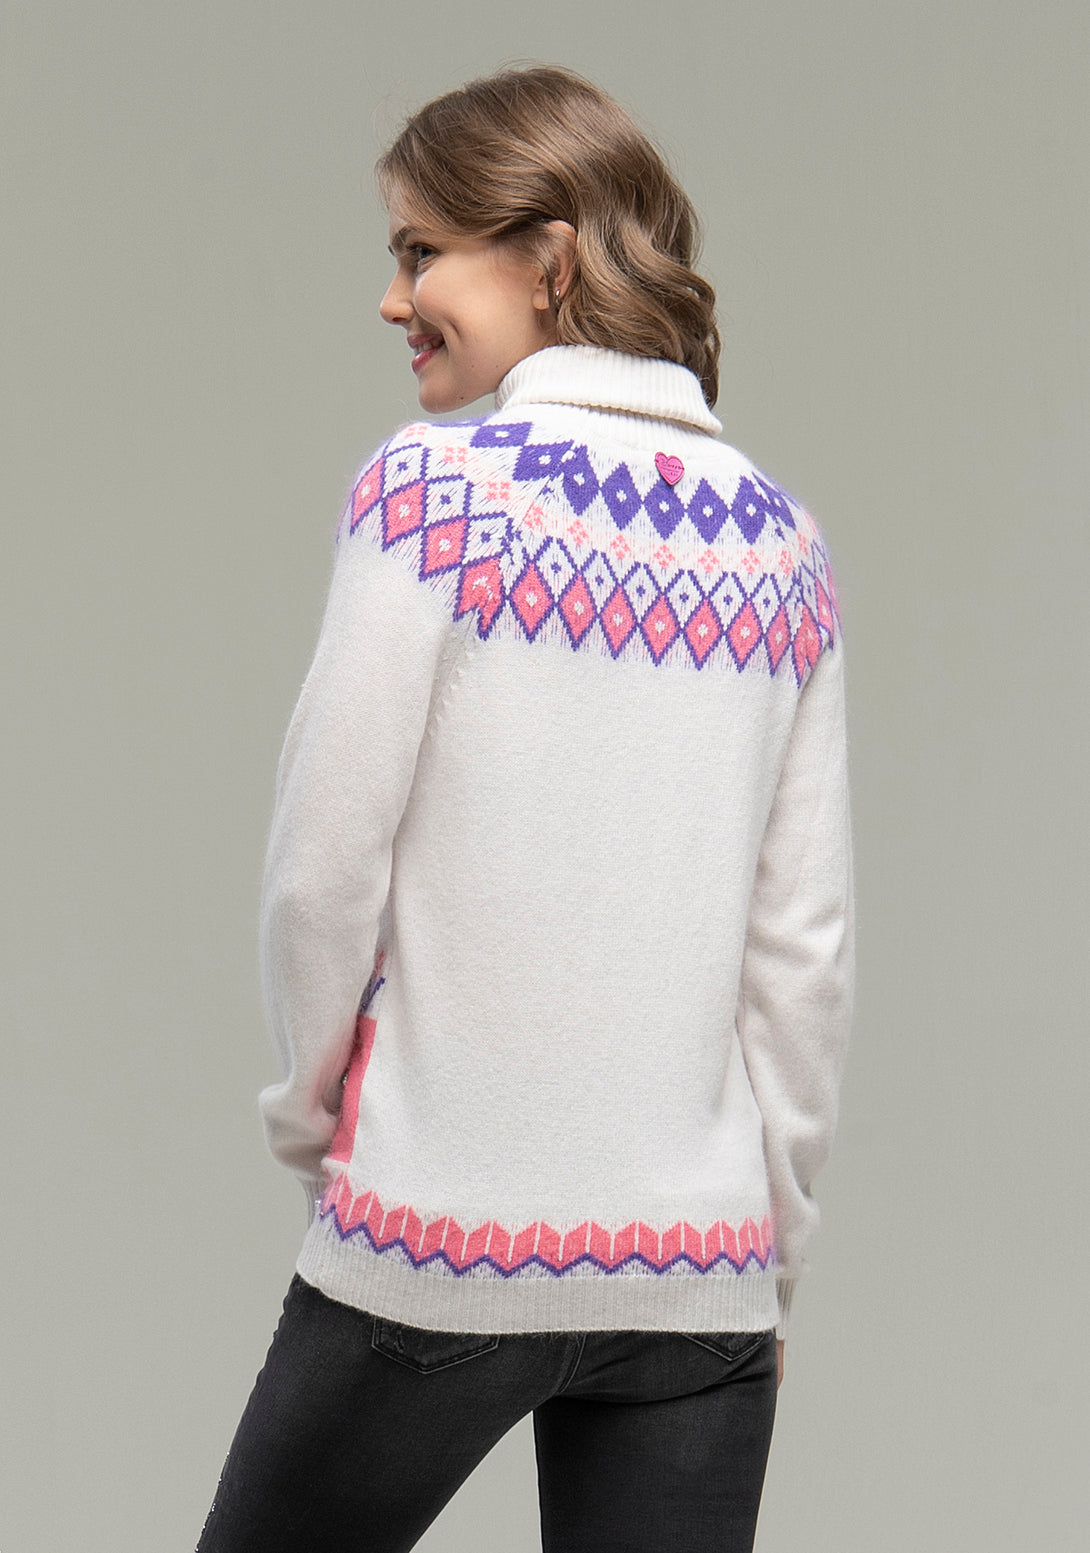 Knitwear regular fit made in angora and wool and with Disney's jacquard effect